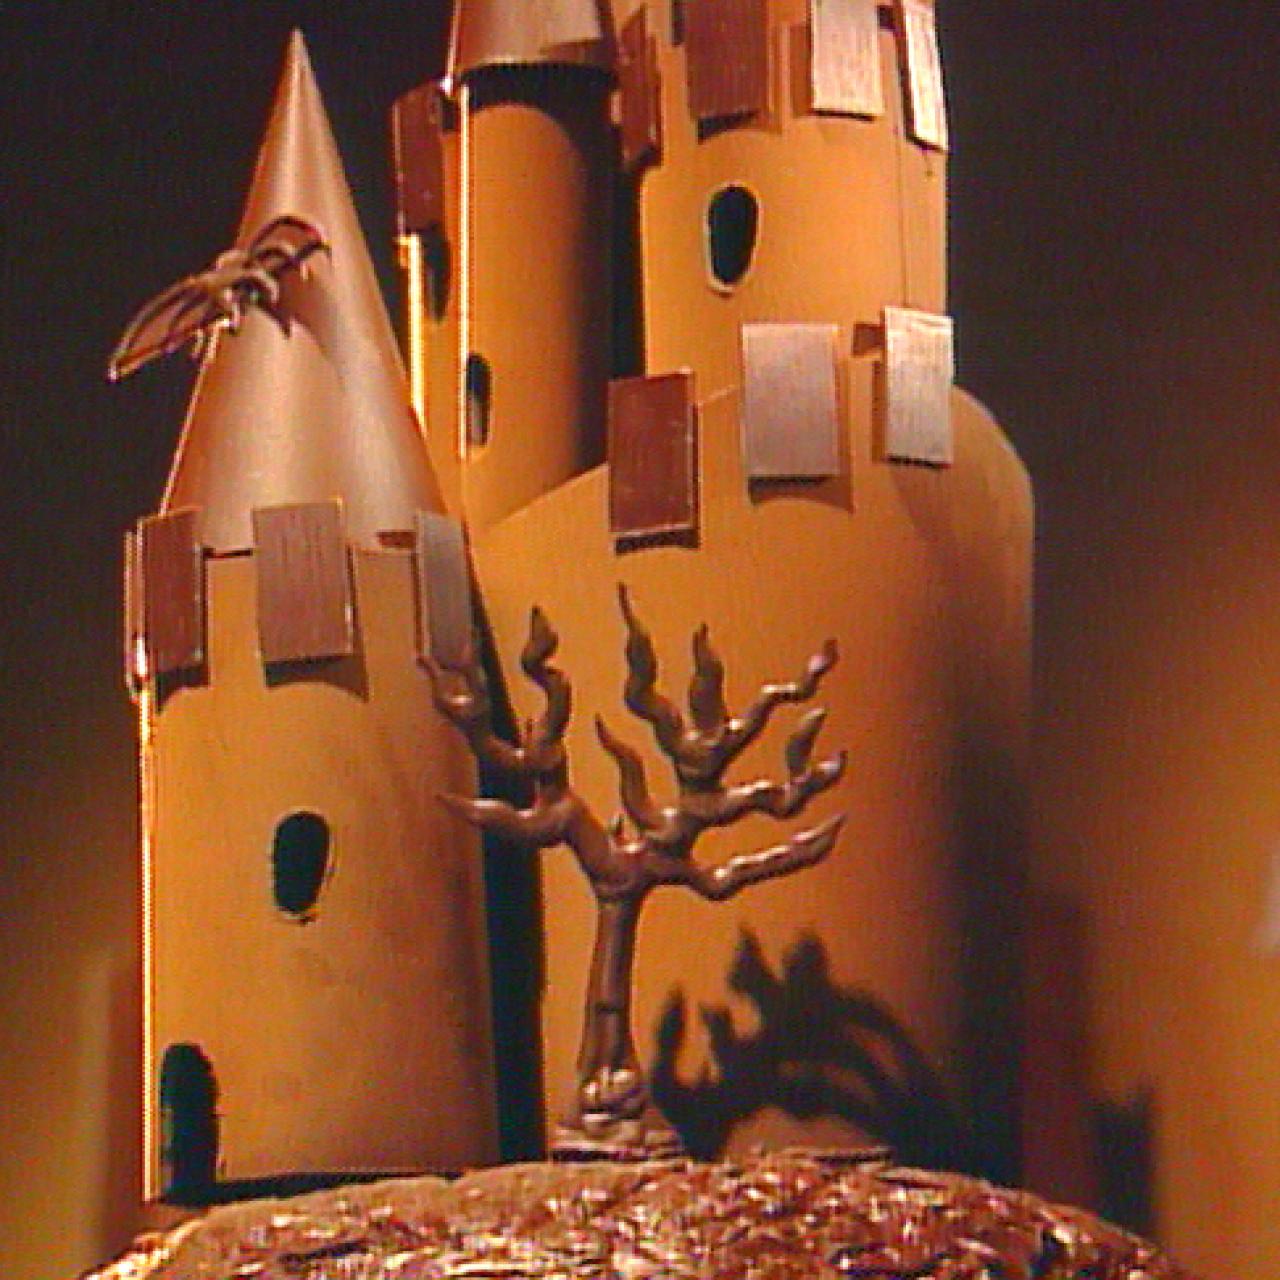 Castle in the Air: Paper Model Tools and Techniques: Glue